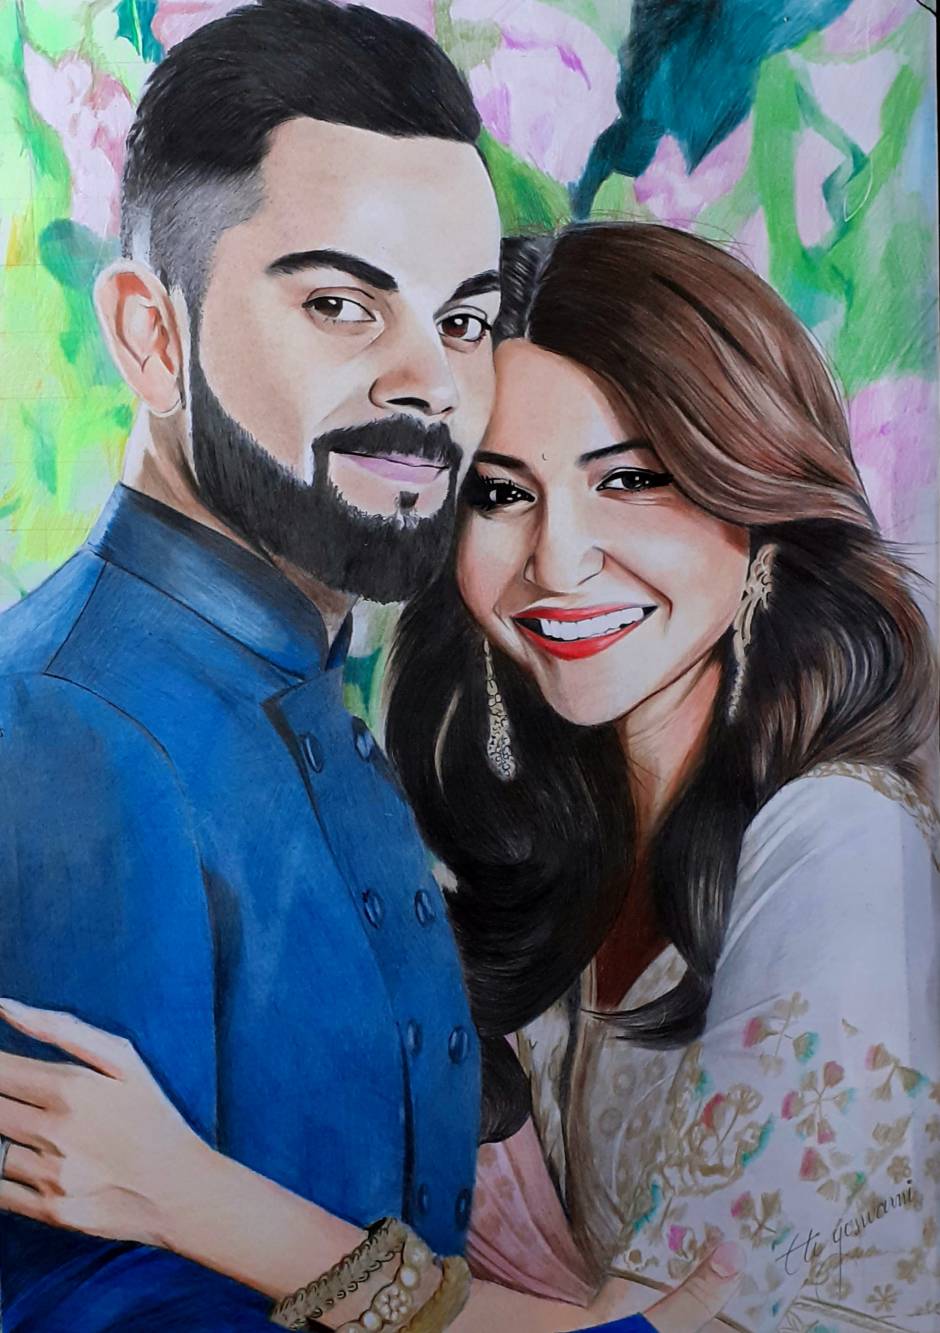 MS Portraits - My new drawing of Virat Kohli an Indian international  cricketer and the former captain of the Indian national cricket  team.Considered to be one of the best cricketers in the